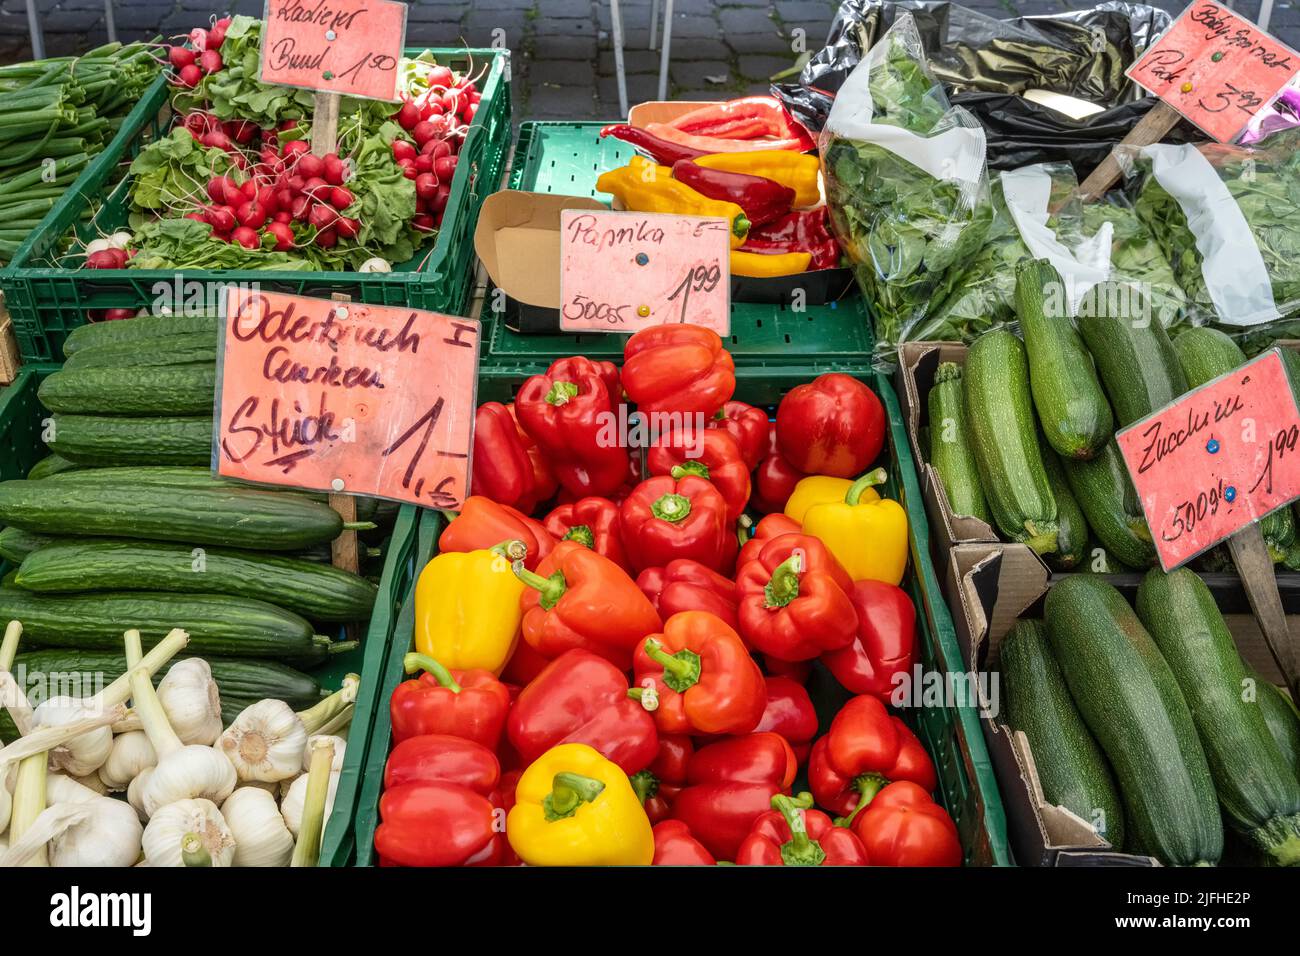 Bell pepper, cucumber and courgette for sale at a market Stock Photo